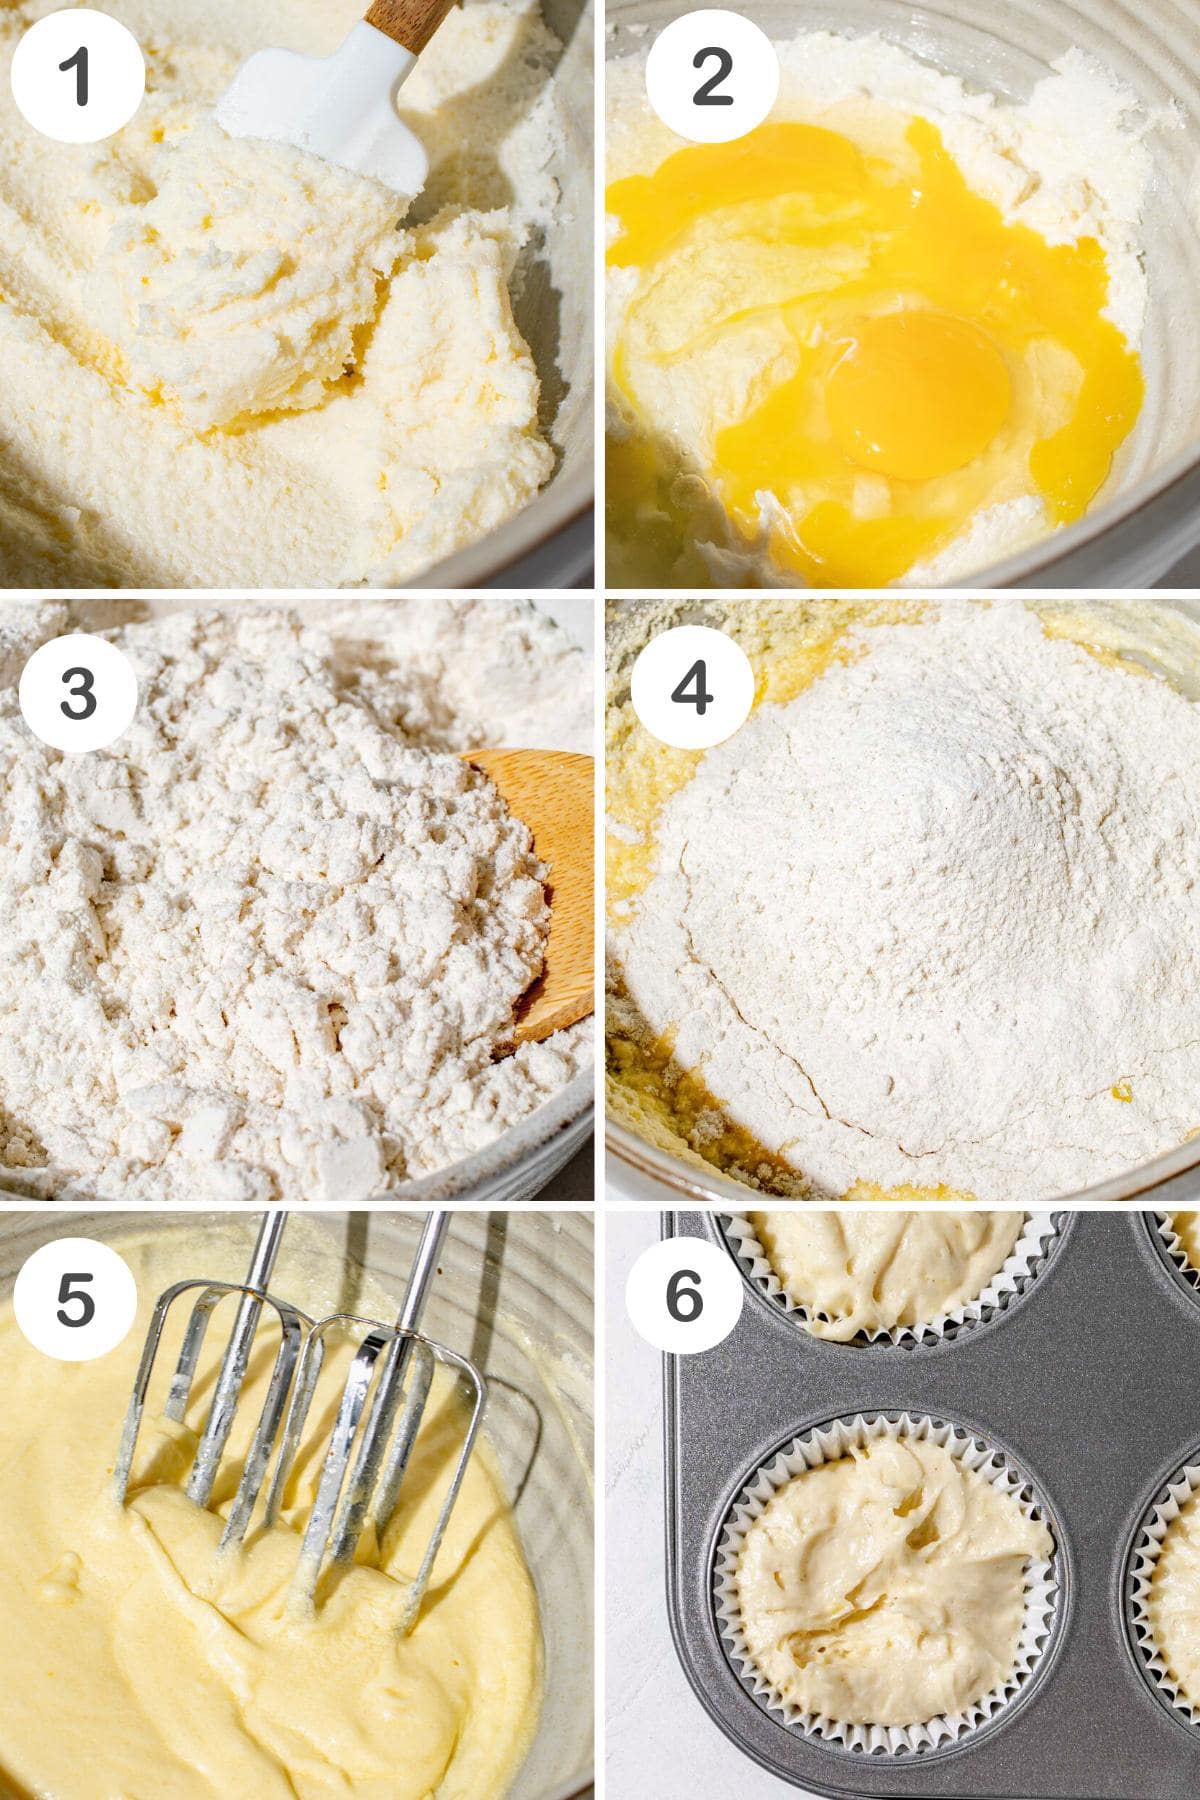 numbered step by step photos showing how to make gluten free cupcakes